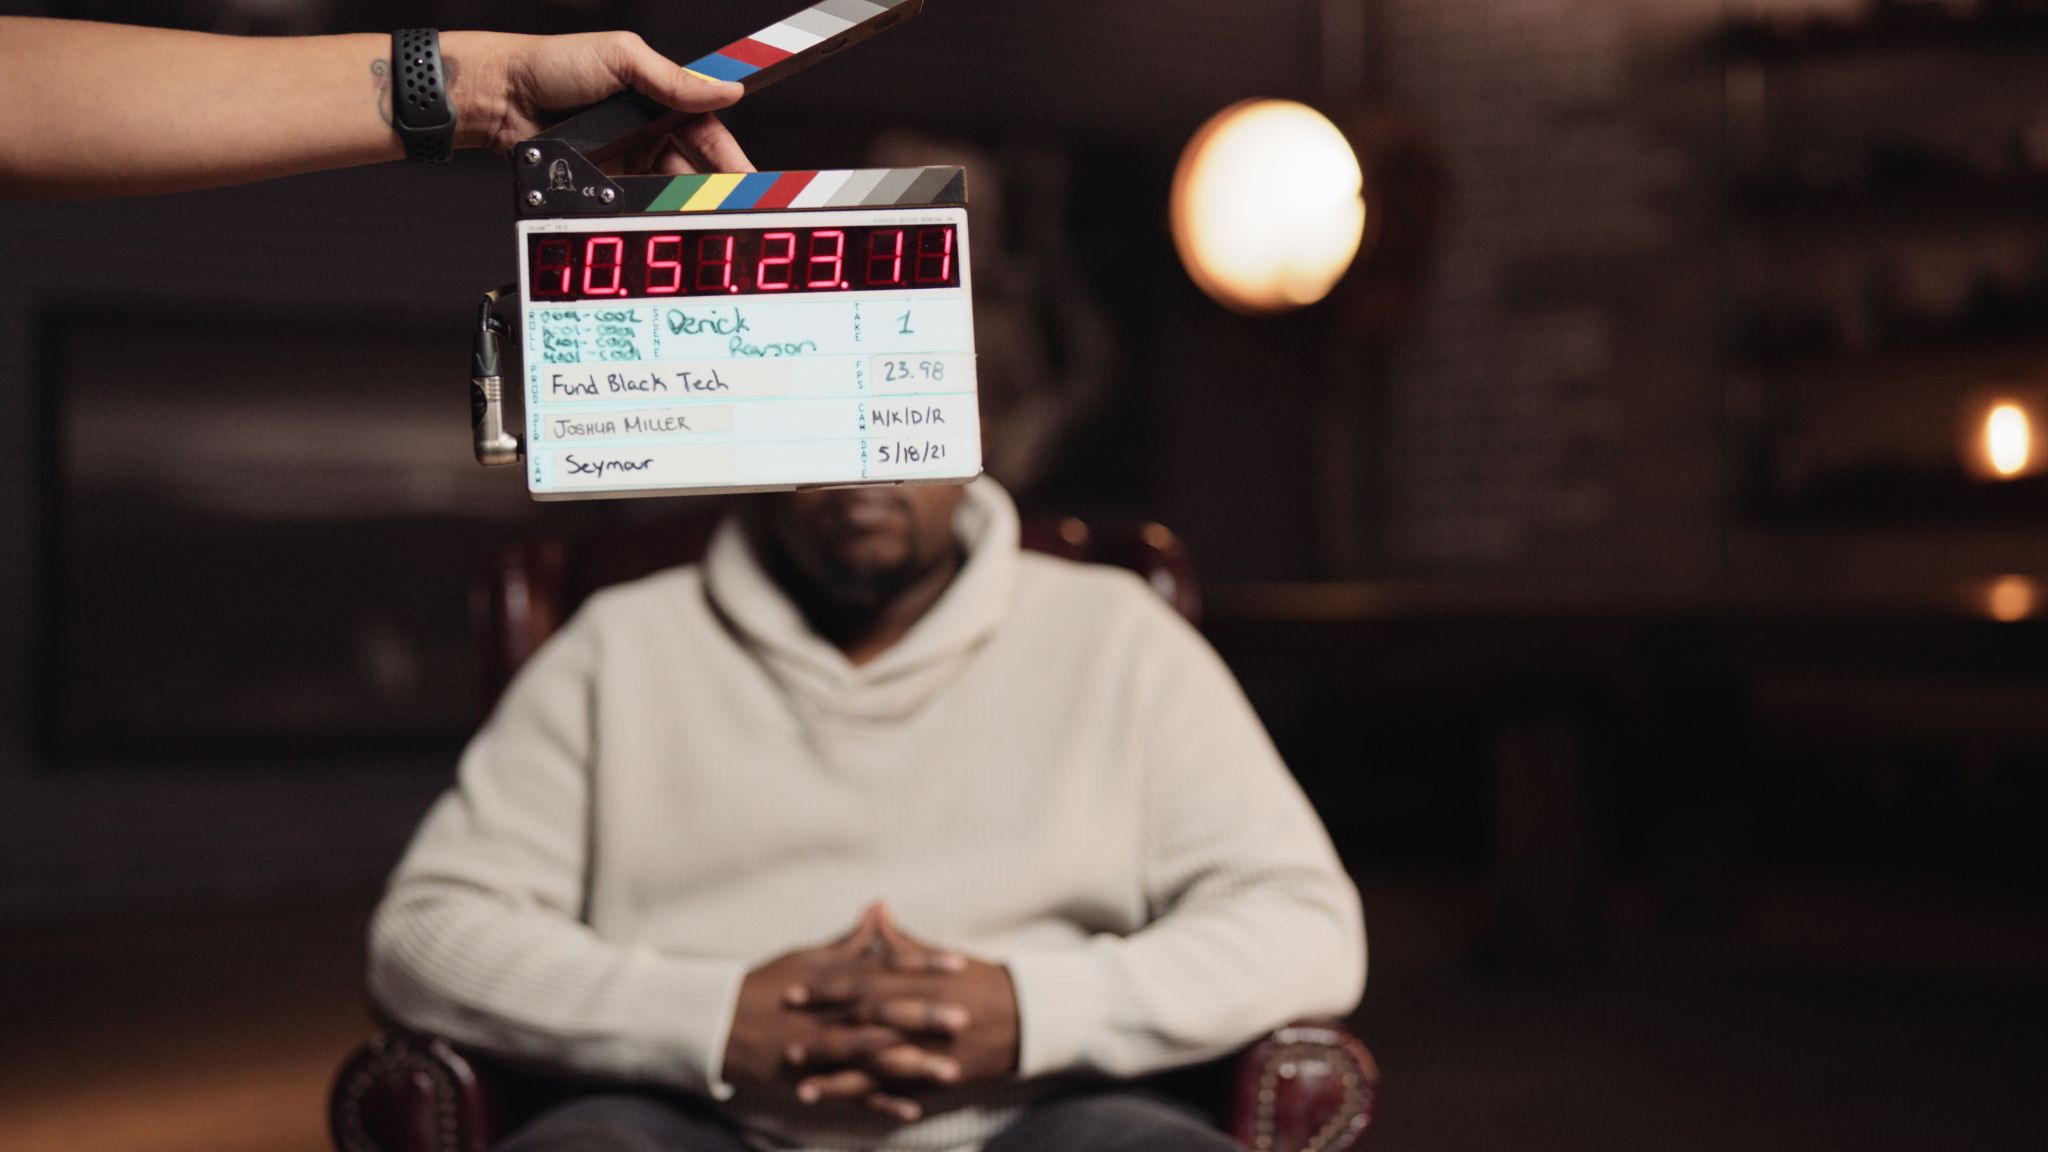 8K Fund Black Tech Derrick View of clapboard being used in front of him before shoot